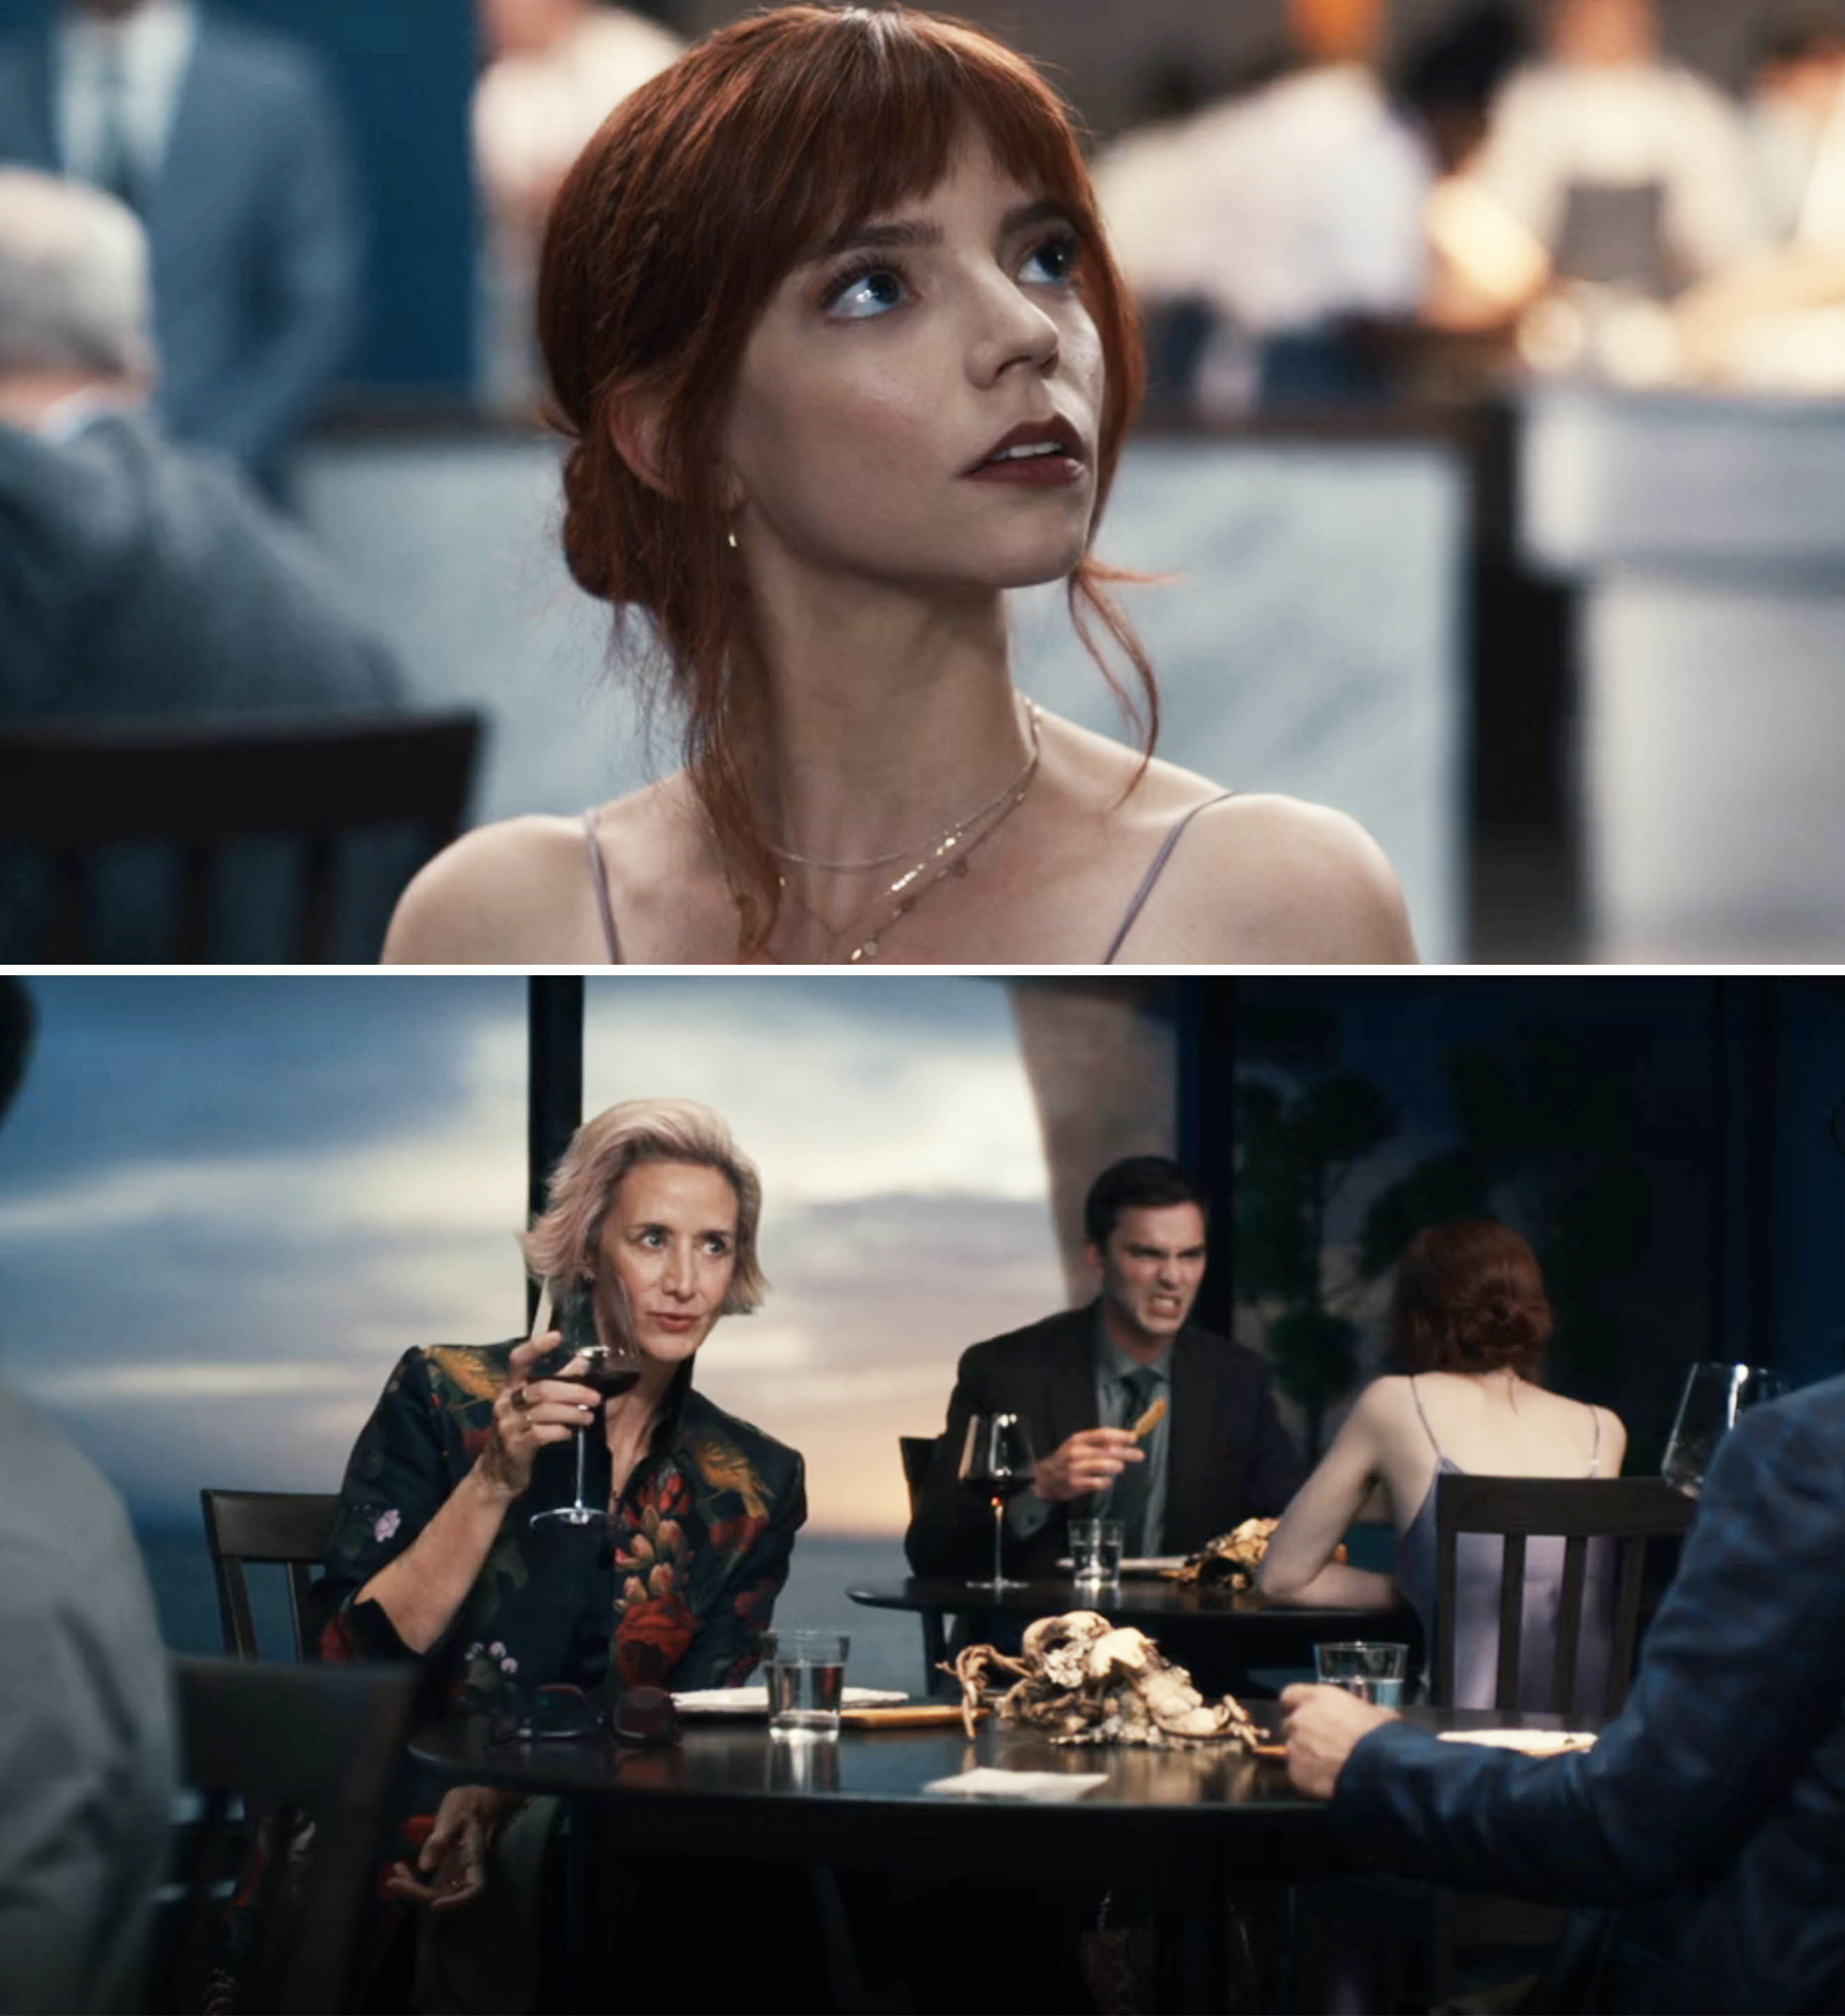 Scene from The Menu, with one showing Nicholas Hoult&#x27;s and Anya Taylor-Joy&#x27;s characters having a conversation in the background of a scene